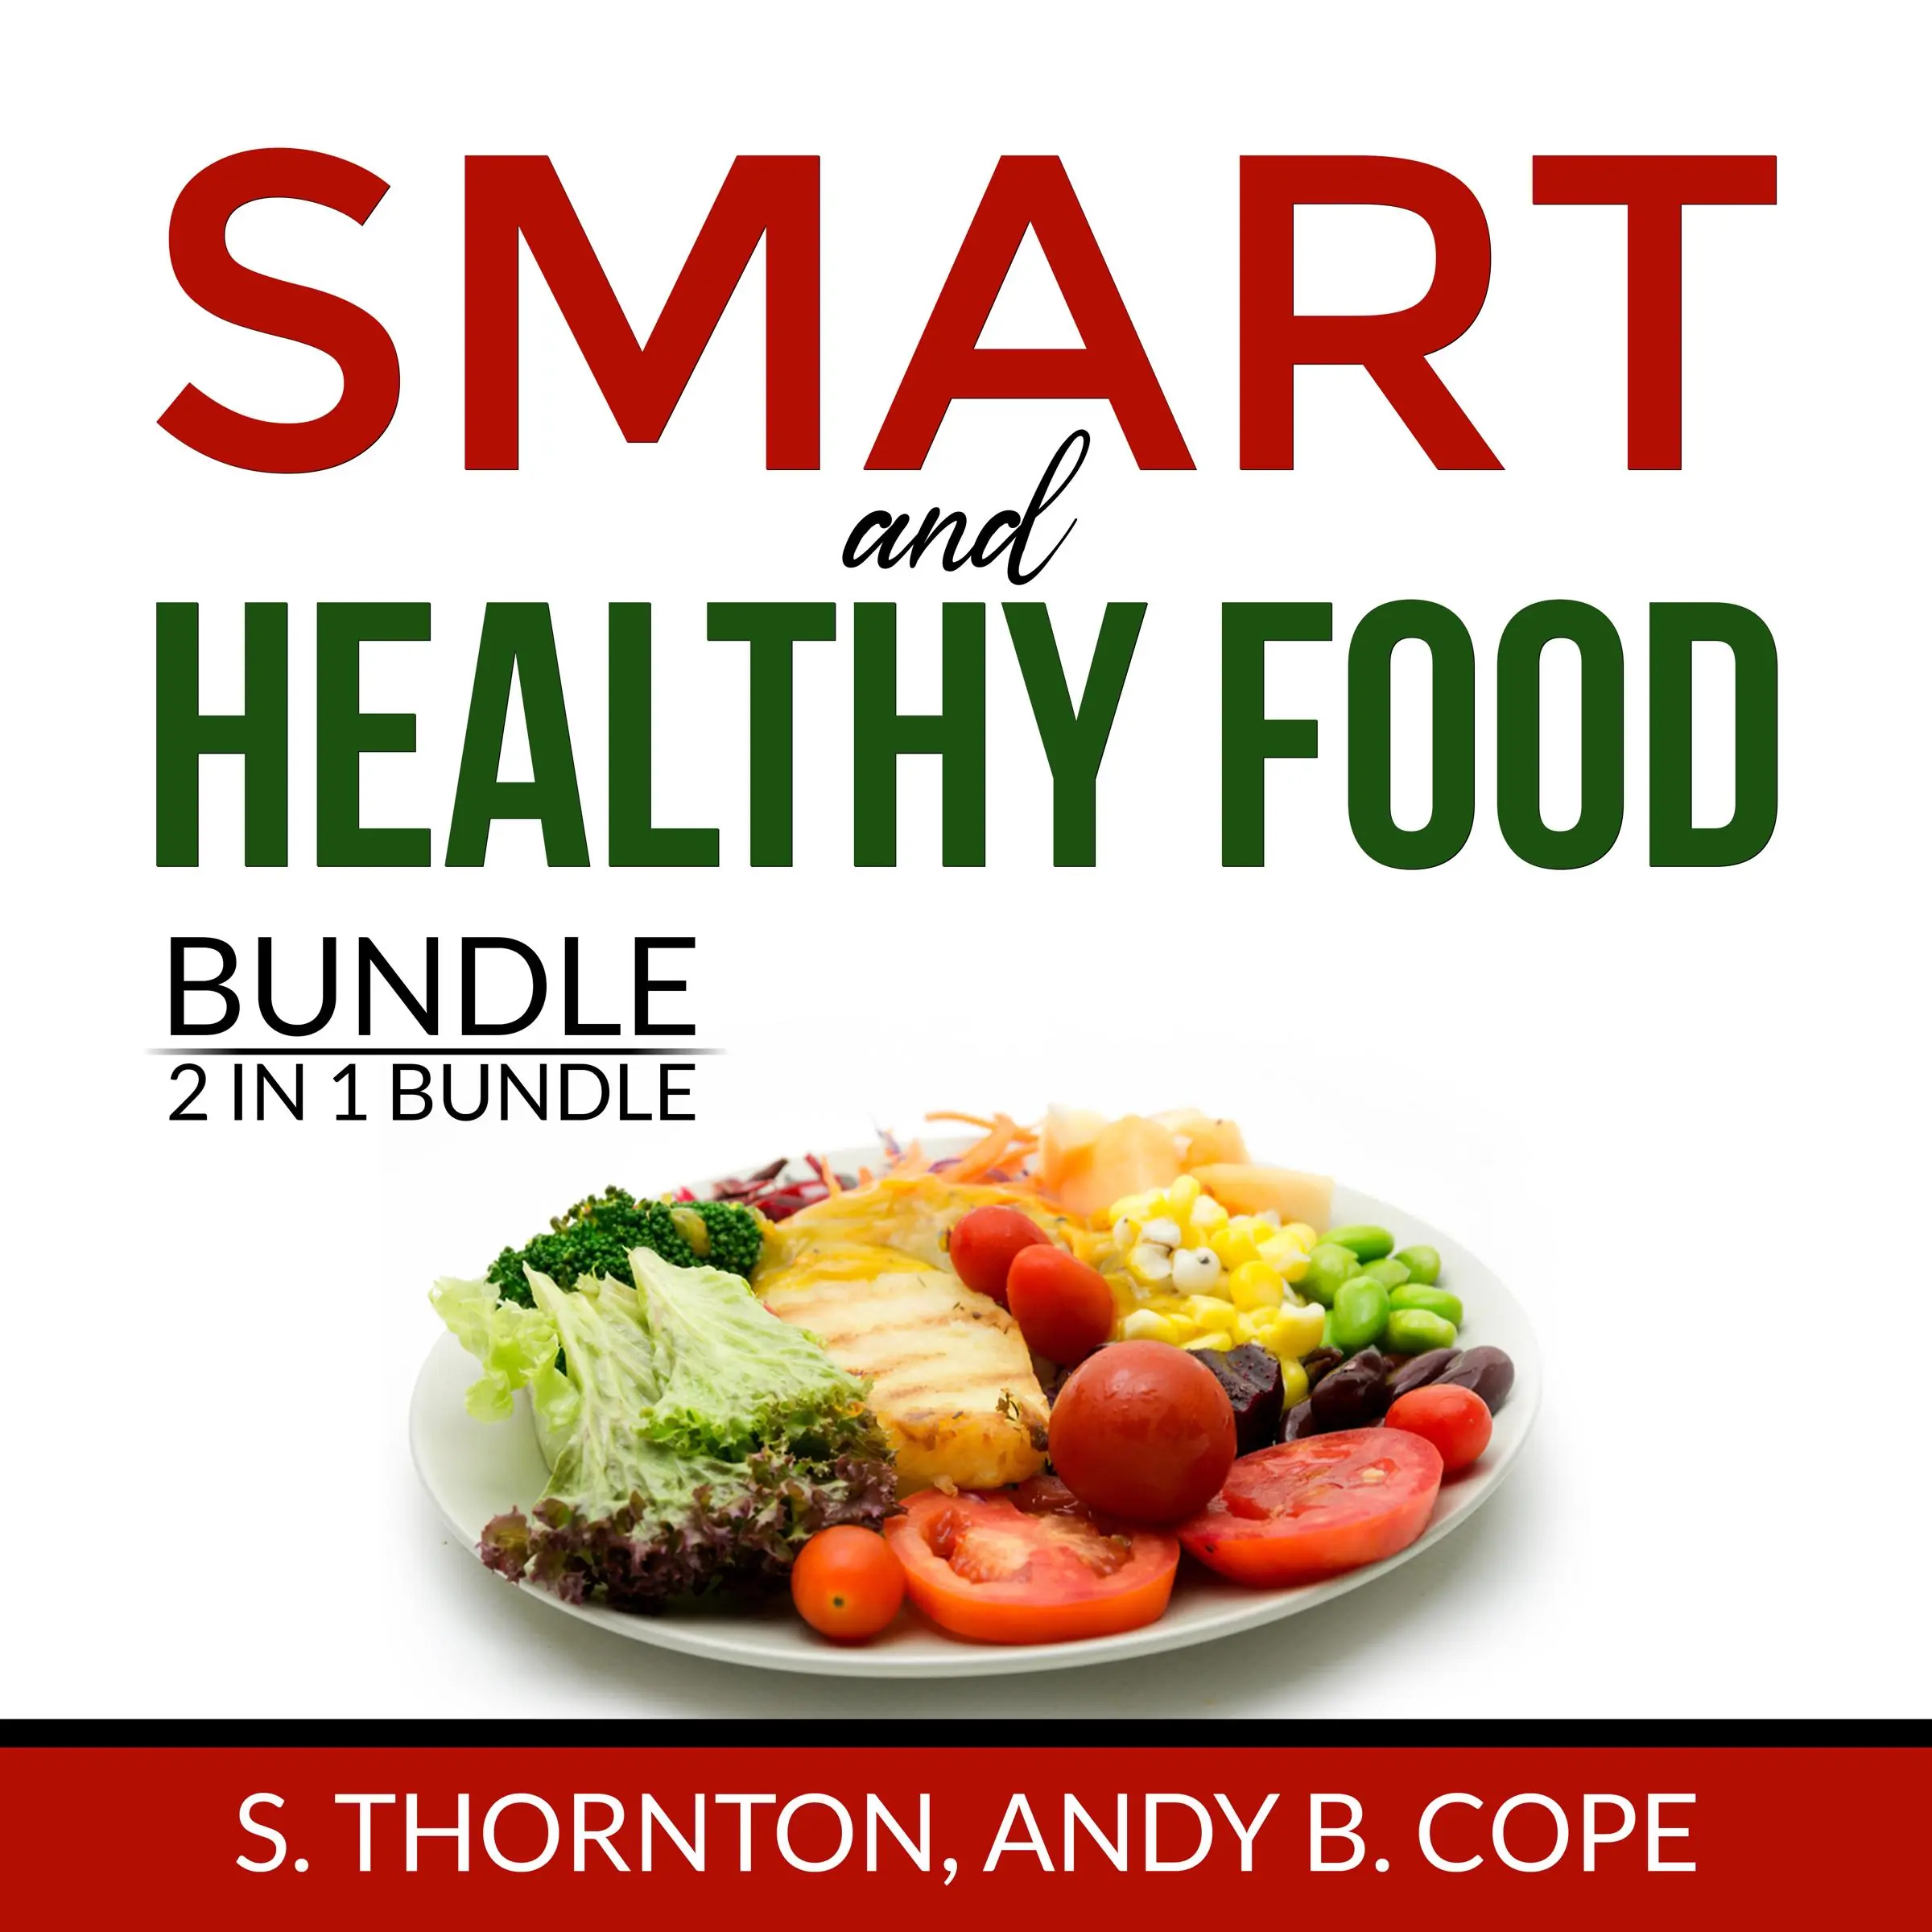 Smart and Healthy Food Bundle, 2 in 1 Bundle: Nutrient Power and Genius Foods Audiobook by and Andy B. Cope